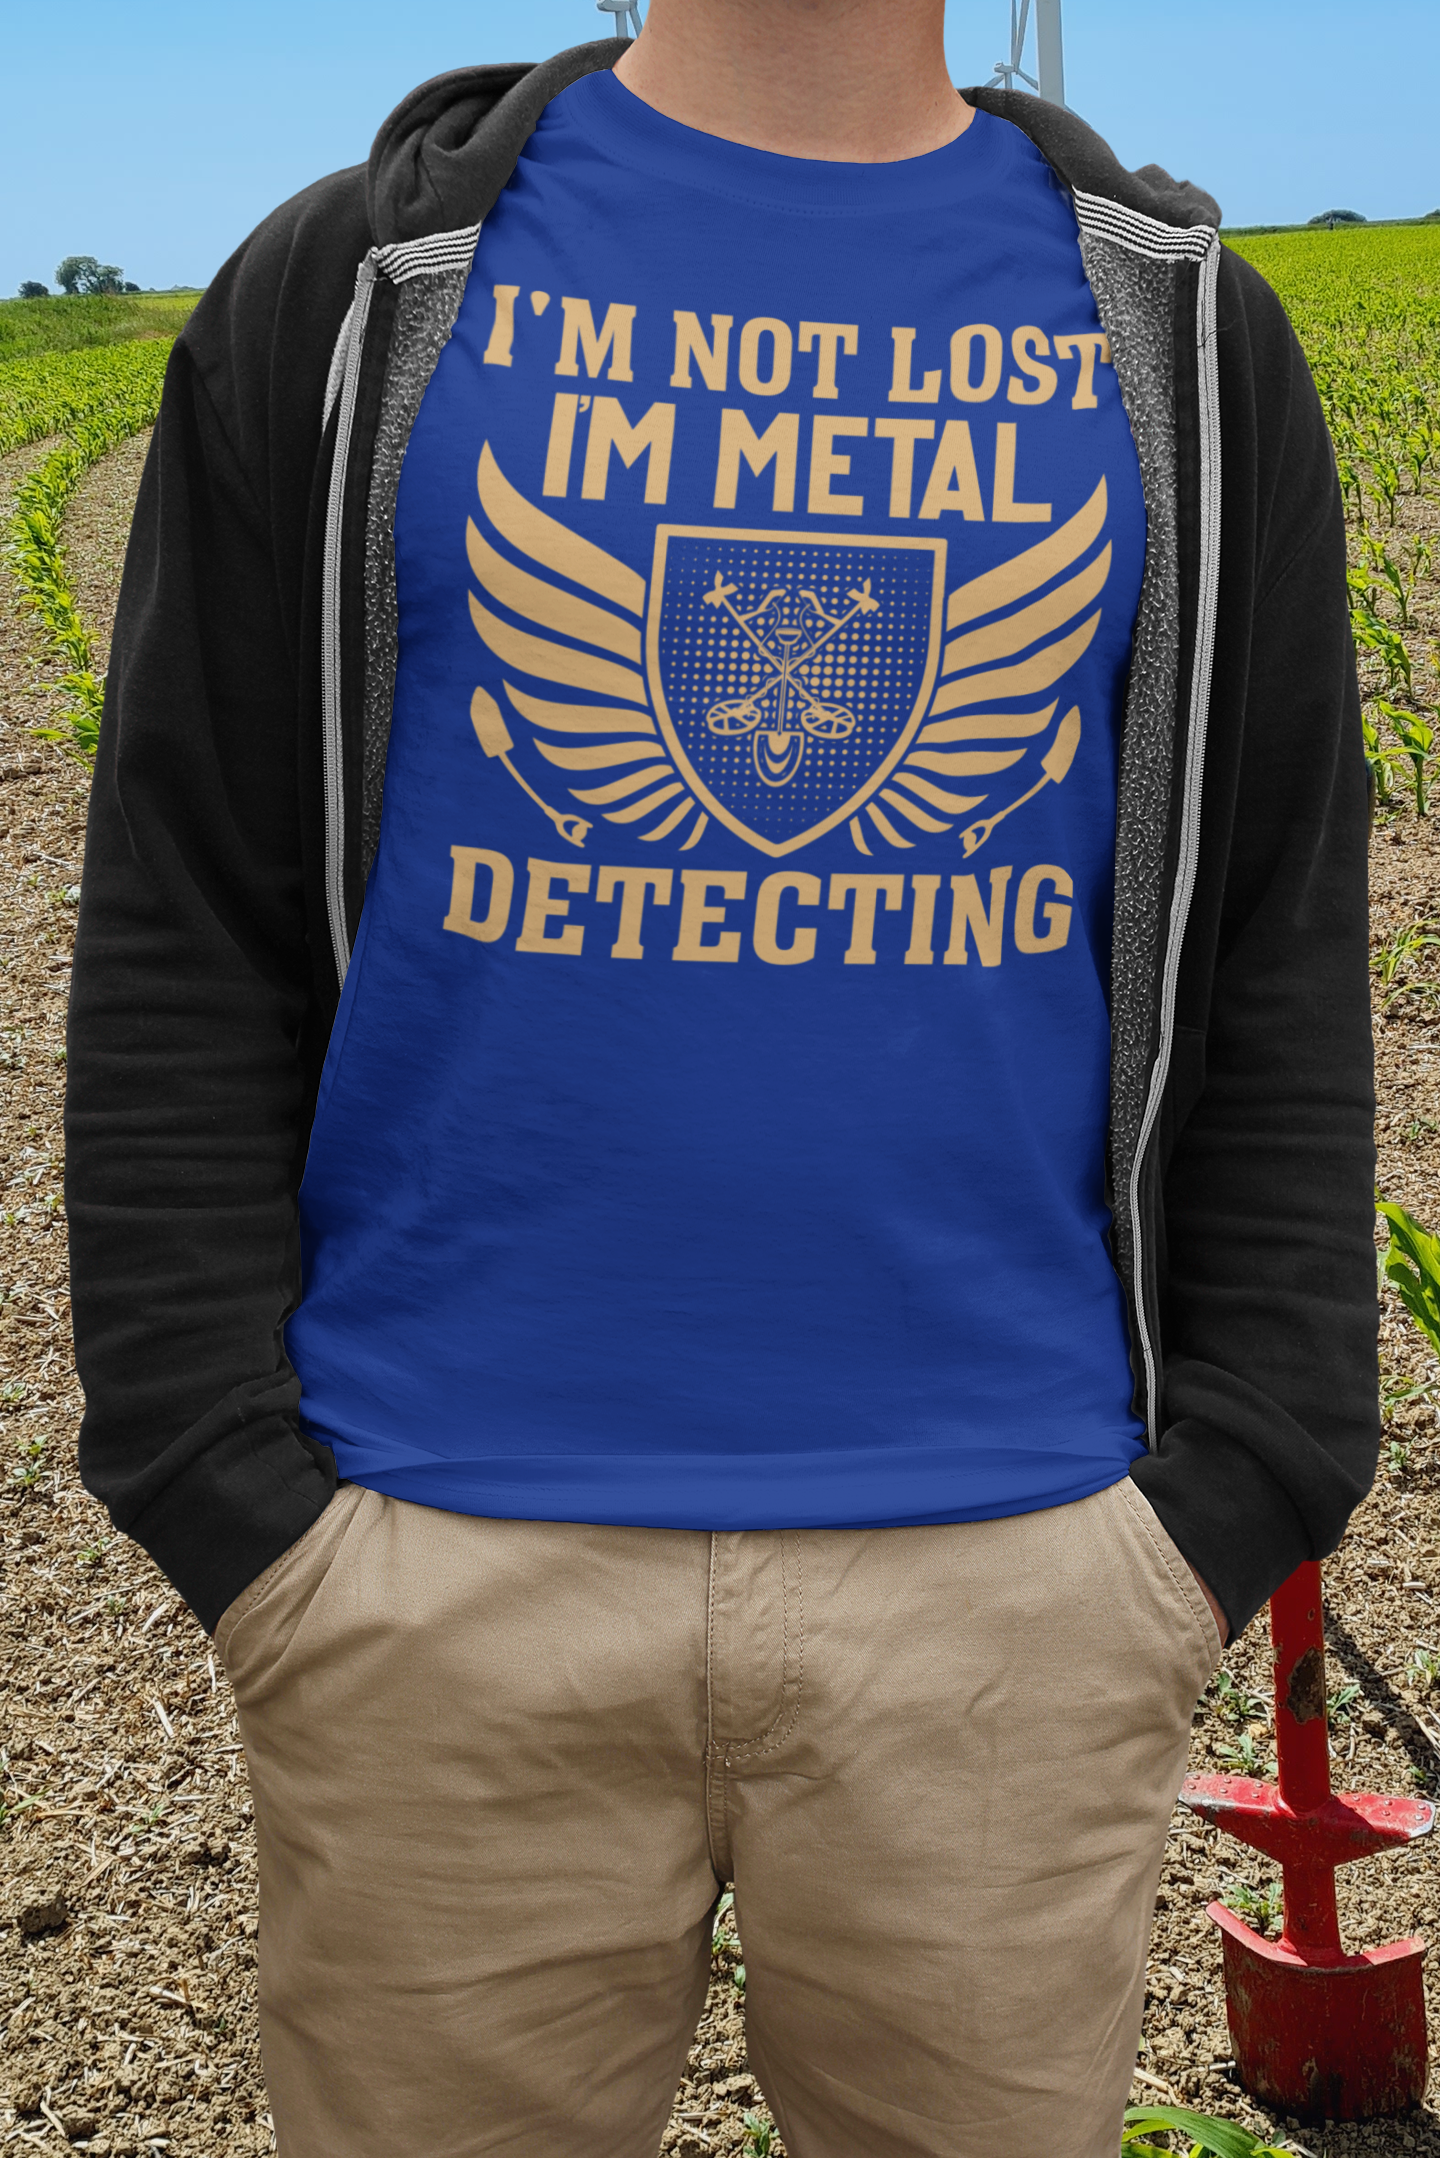 I'm Not Lost I'm Metal Detecting